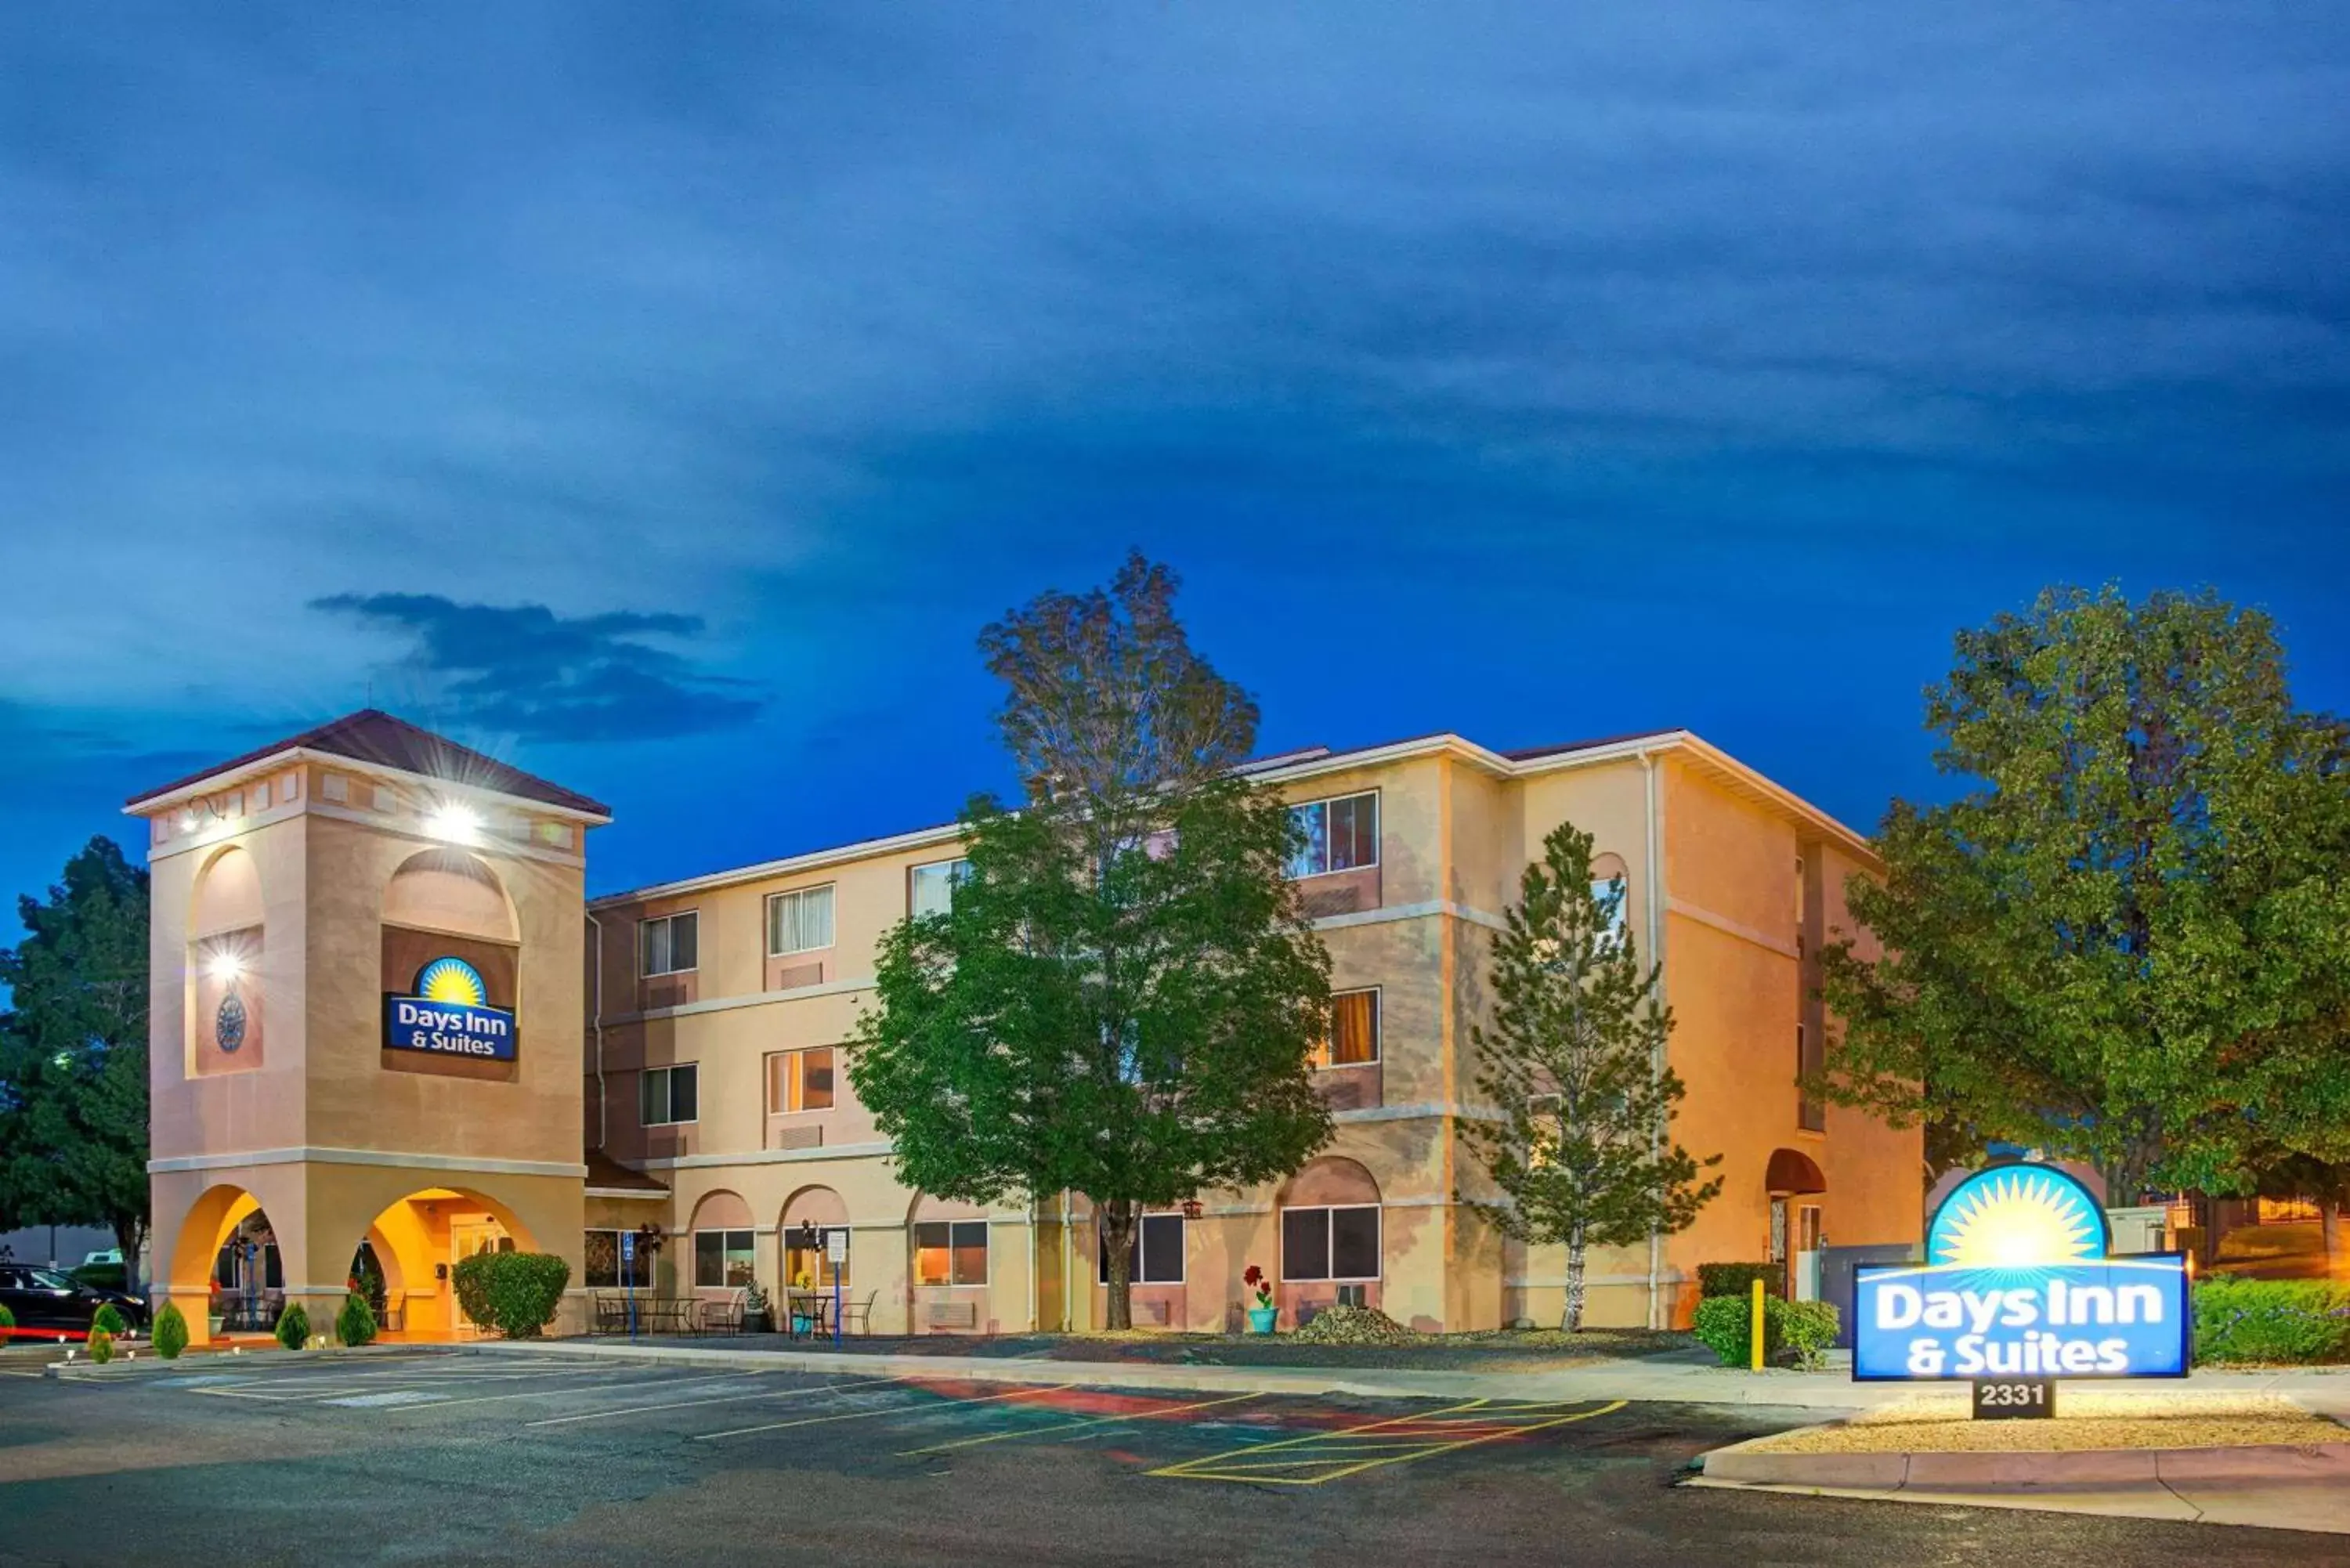 Property Building in Days Inn & Suites by Wyndham Airport Albuquerque